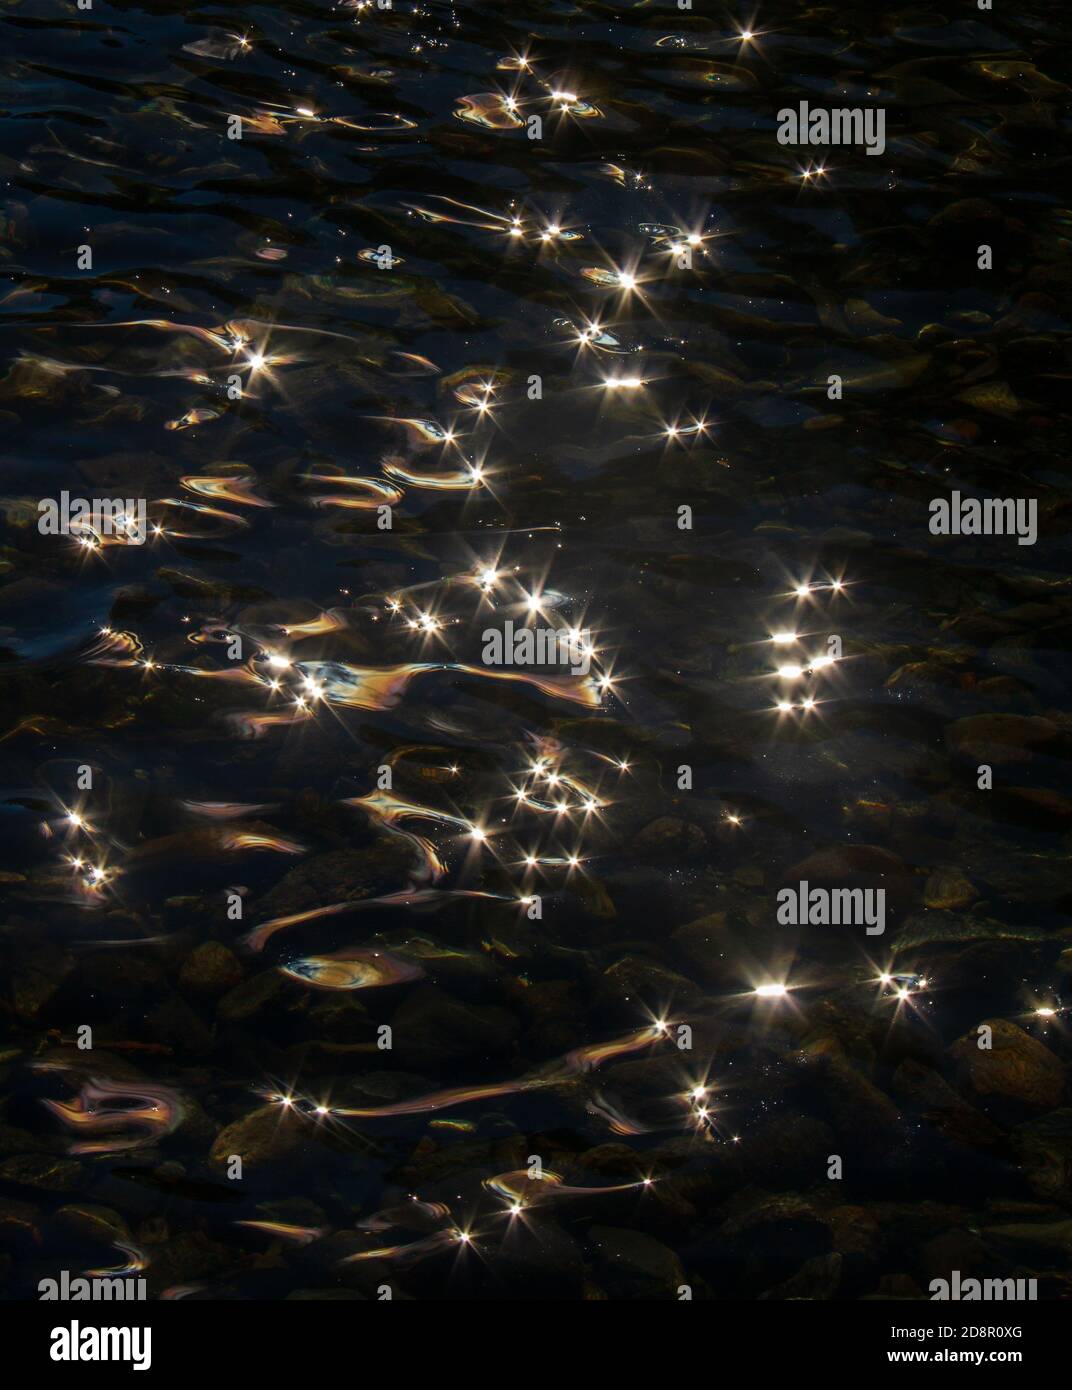 Sunlight reflected on rippling water.  Design made by stars on water. Stock Photo